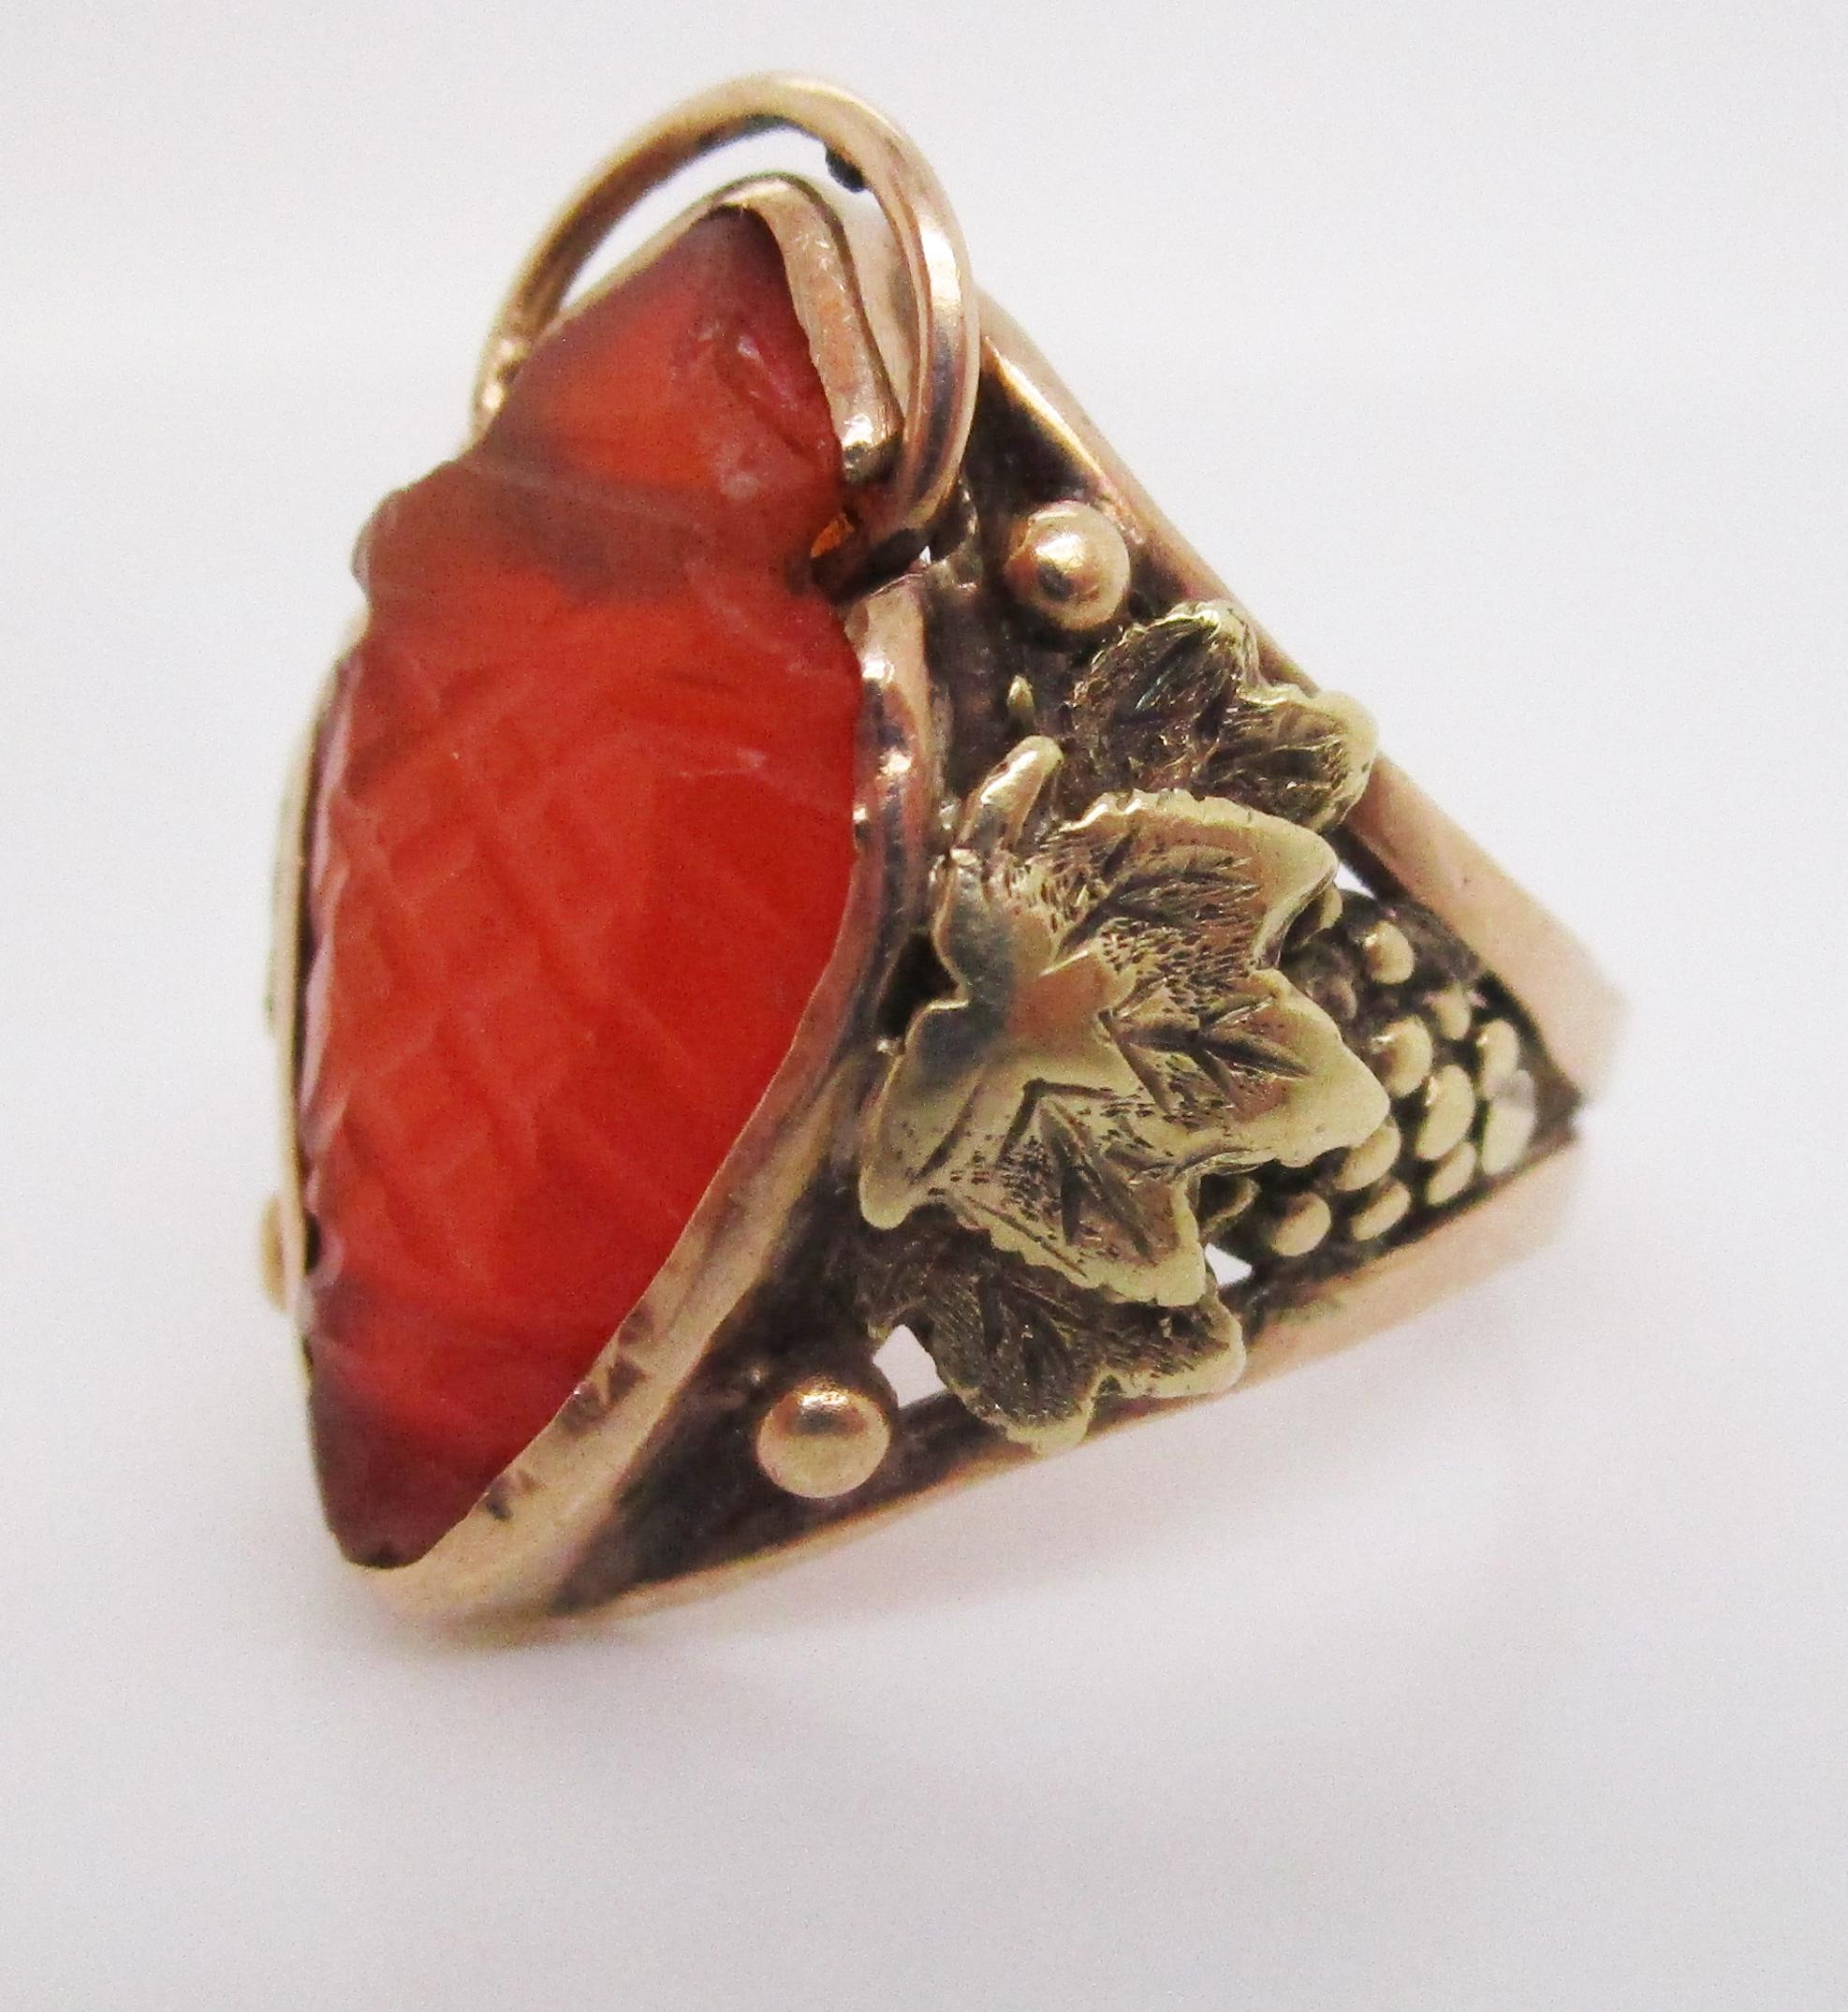 Arts & Crafts Handmade 14 Karat Yellow Gold Carnelian Ring with Grape Leaf Motif In Excellent Condition For Sale In Lexington, KY